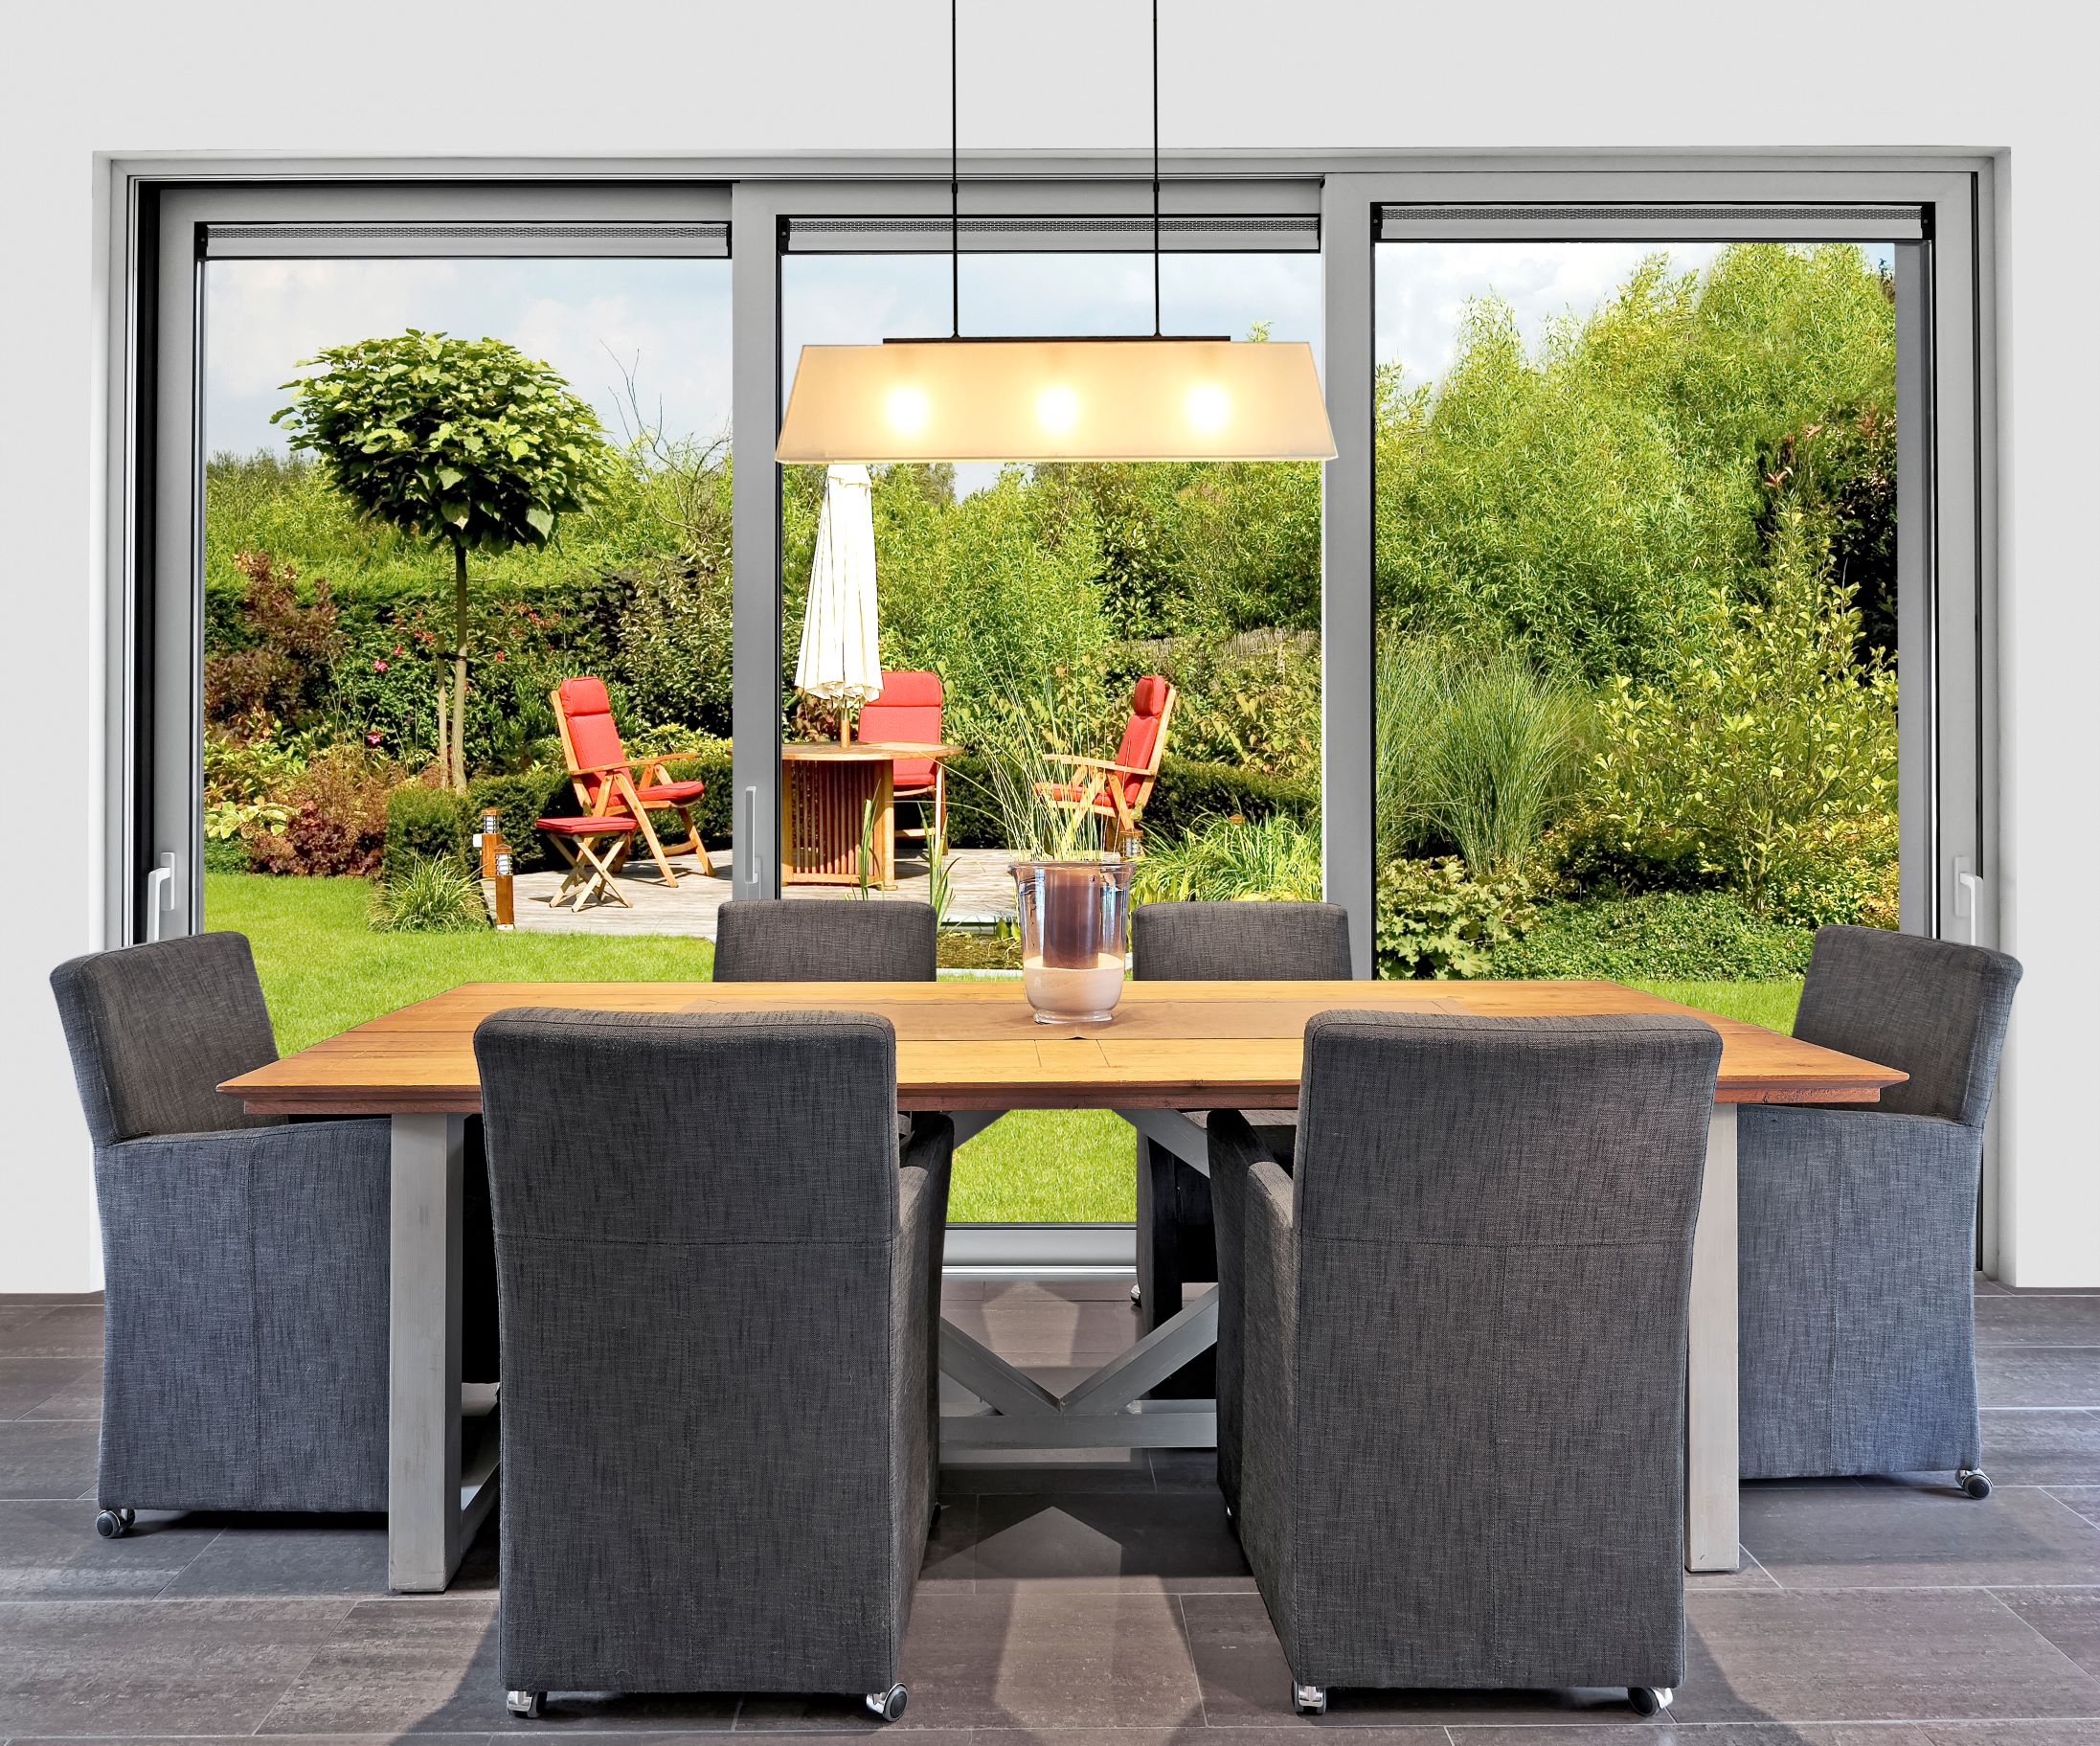 Dining rooms with sliding patio doors can really add an air of elegance, convenience, and fun in a home, especially here in Michigan.